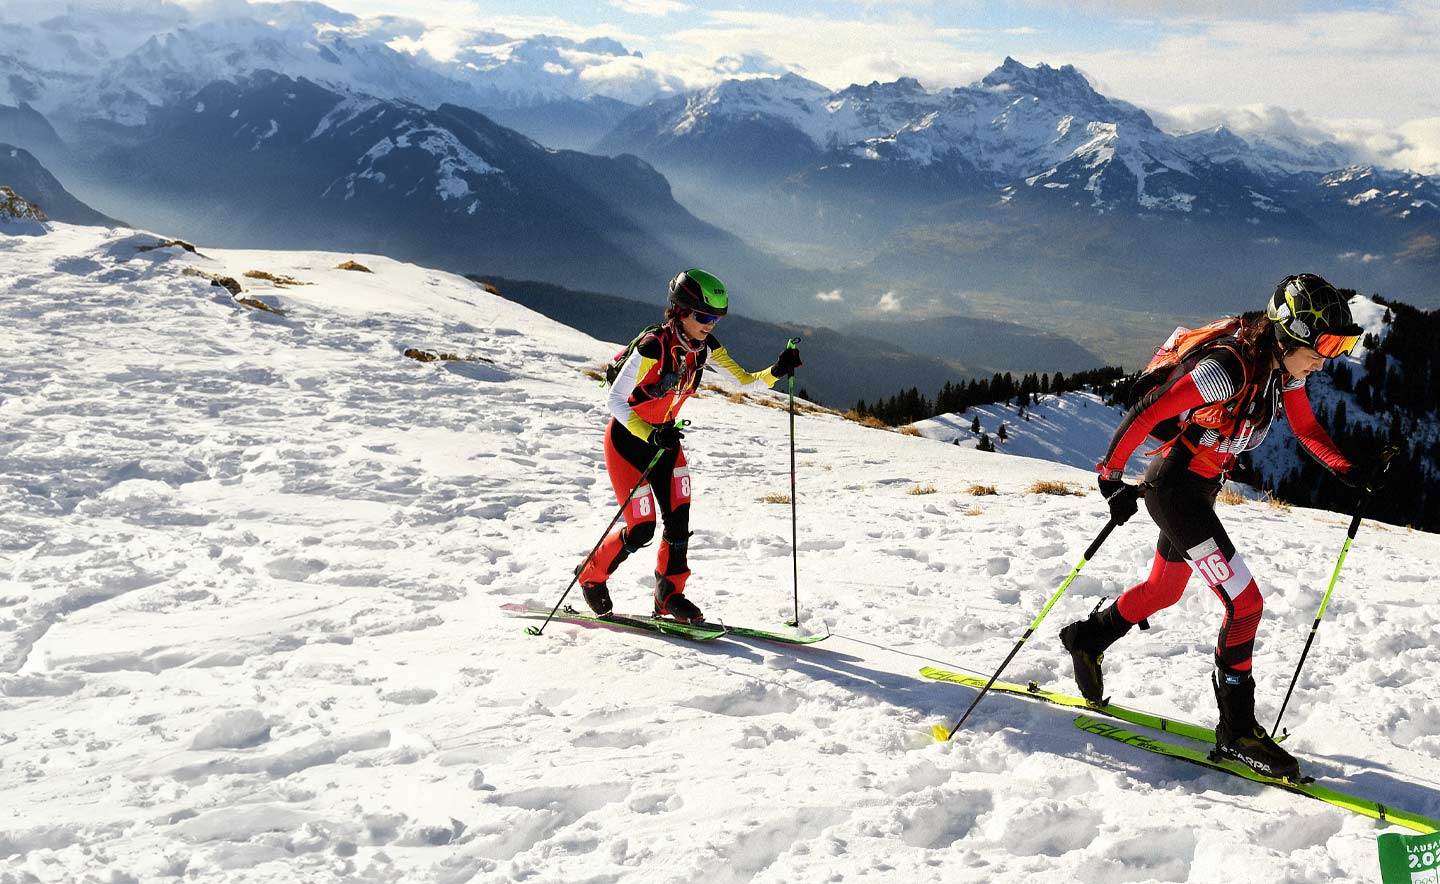 Ares Torra Gendrau (L) of Spain and Lisa Rettensteiner of Austria compete in Women's Individual in Ski Mountaineering during day 1 of the Lausanne 2020 Winter Youth Olympics on January 10, 2020 in Villars-sur-Ollon, Switzerland.